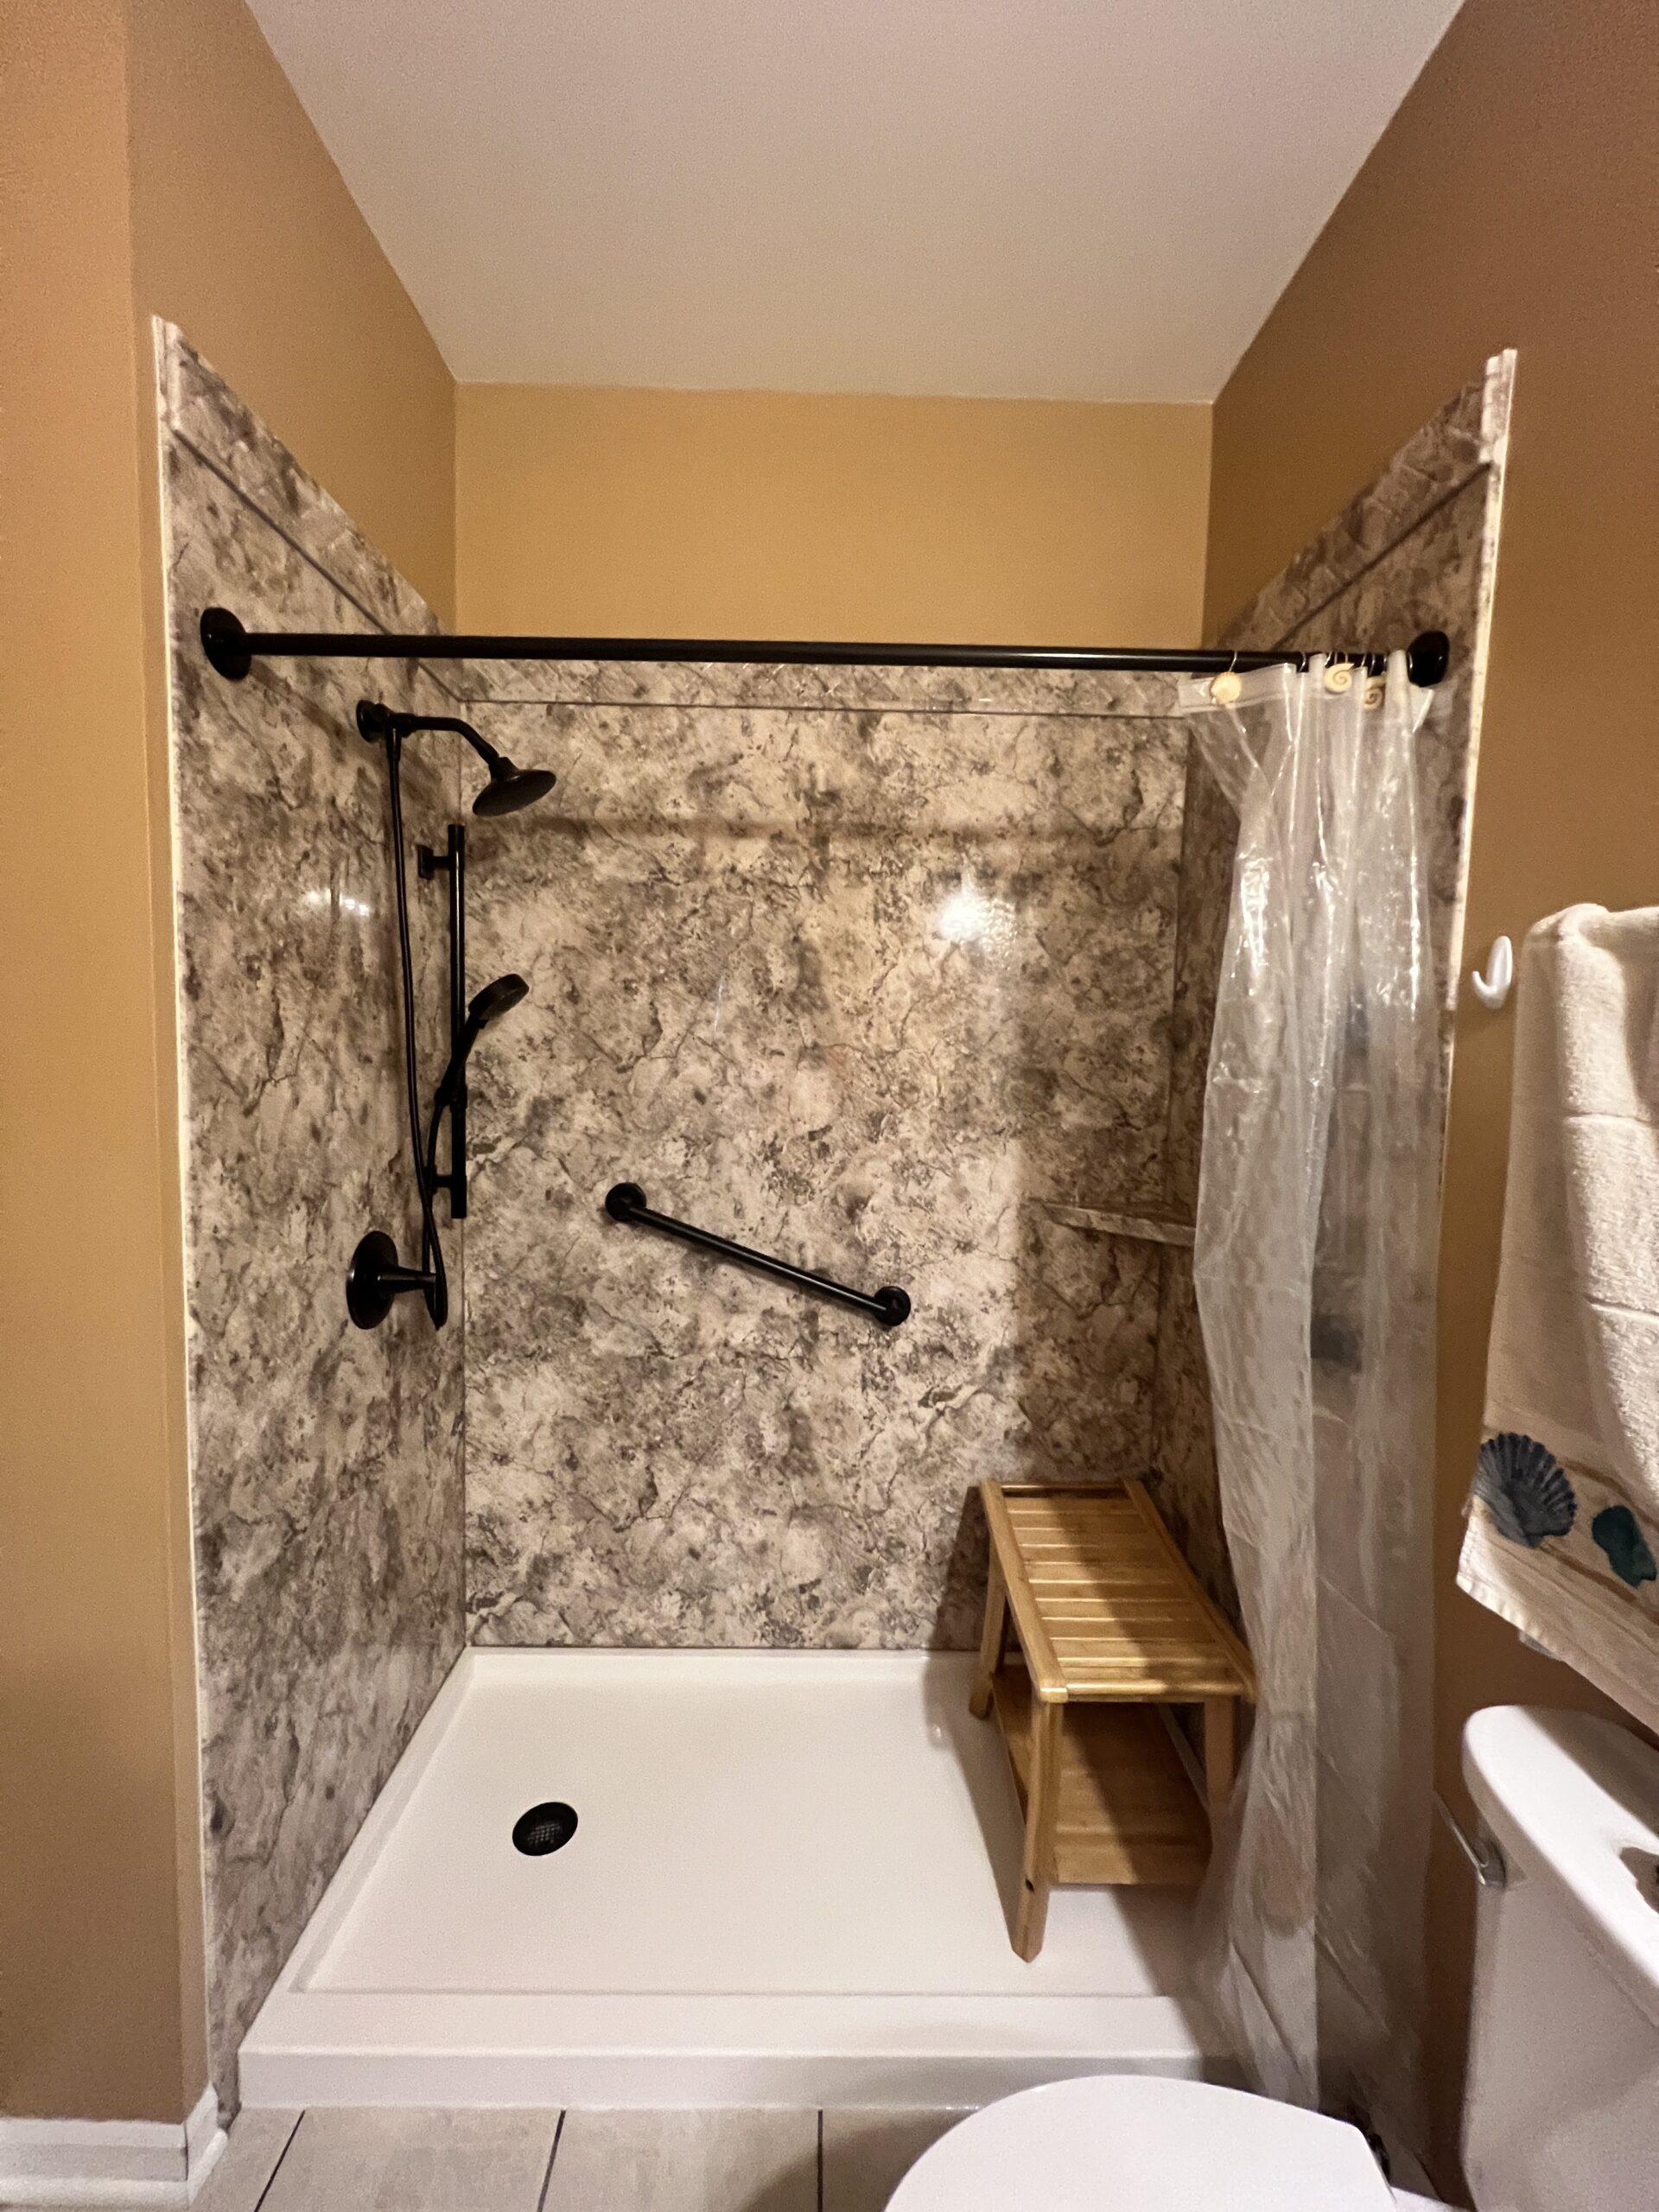 Tips To Upgrade Your Tub-To-Shower Conversion